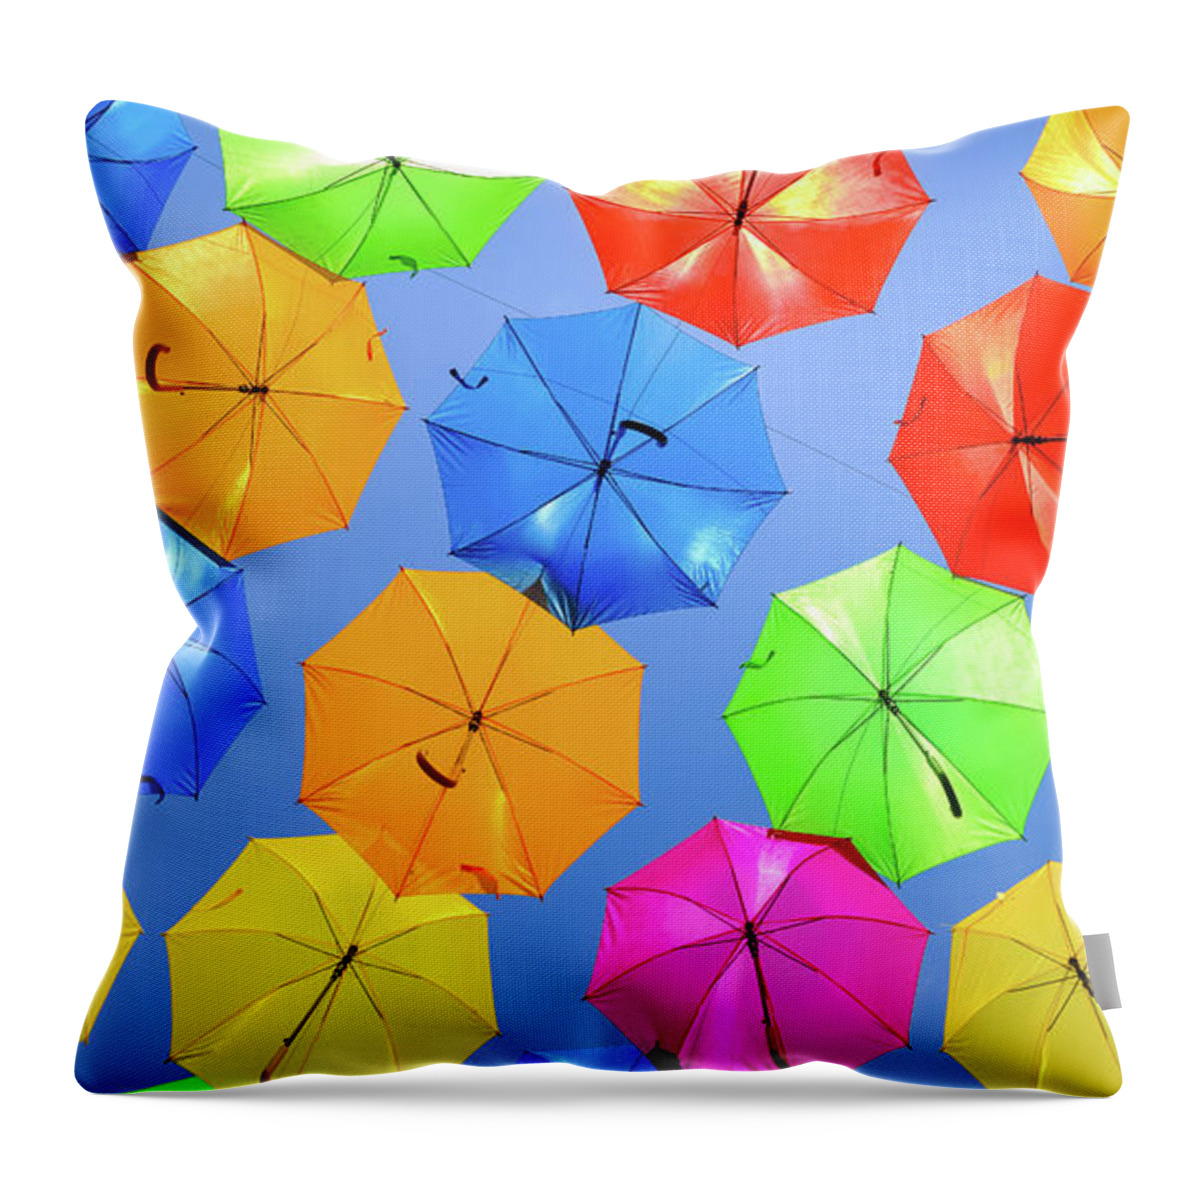 Umbrellas Throw Pillow featuring the photograph Colorful Umbrellas I by Raul Rodriguez